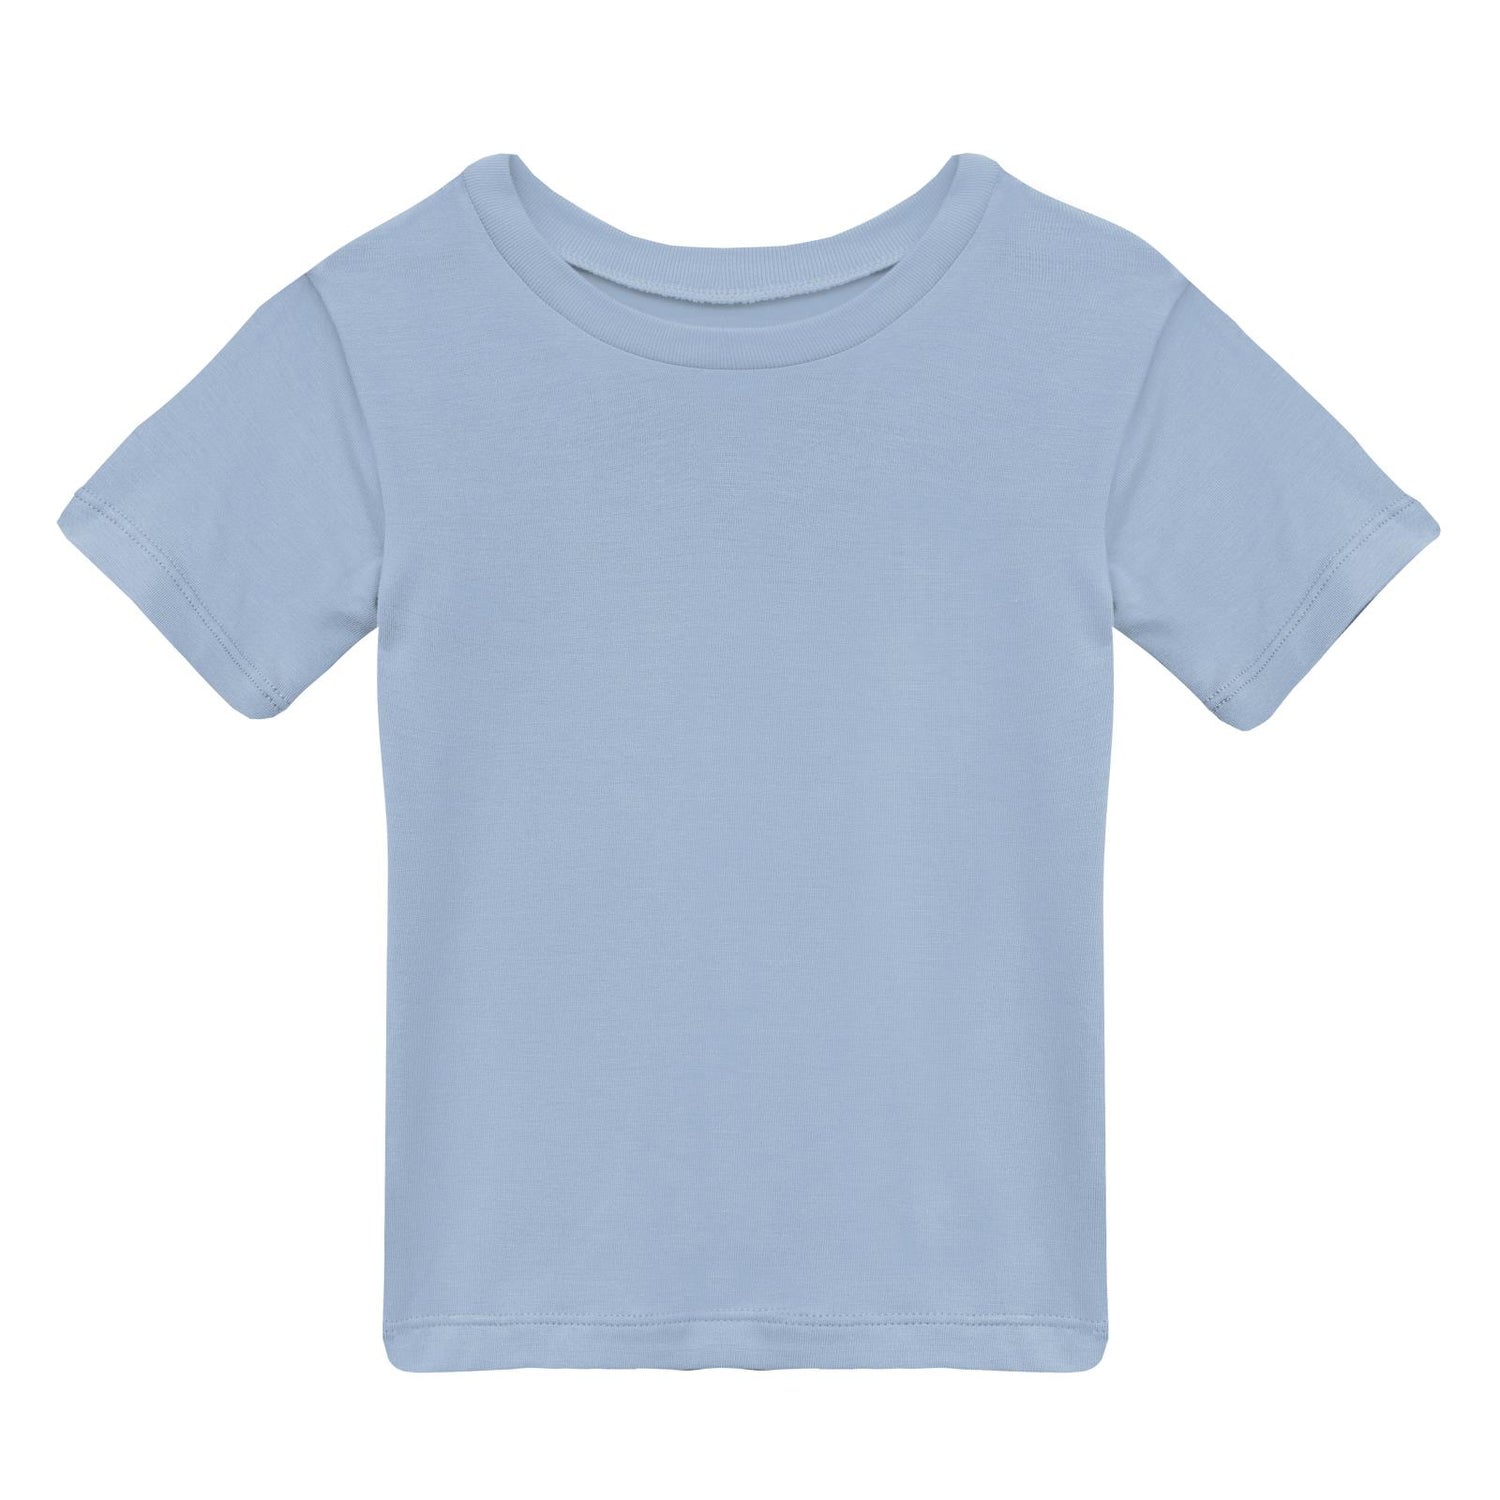 Short Sleeve Easy Fit Crew Neck Tee in Pond